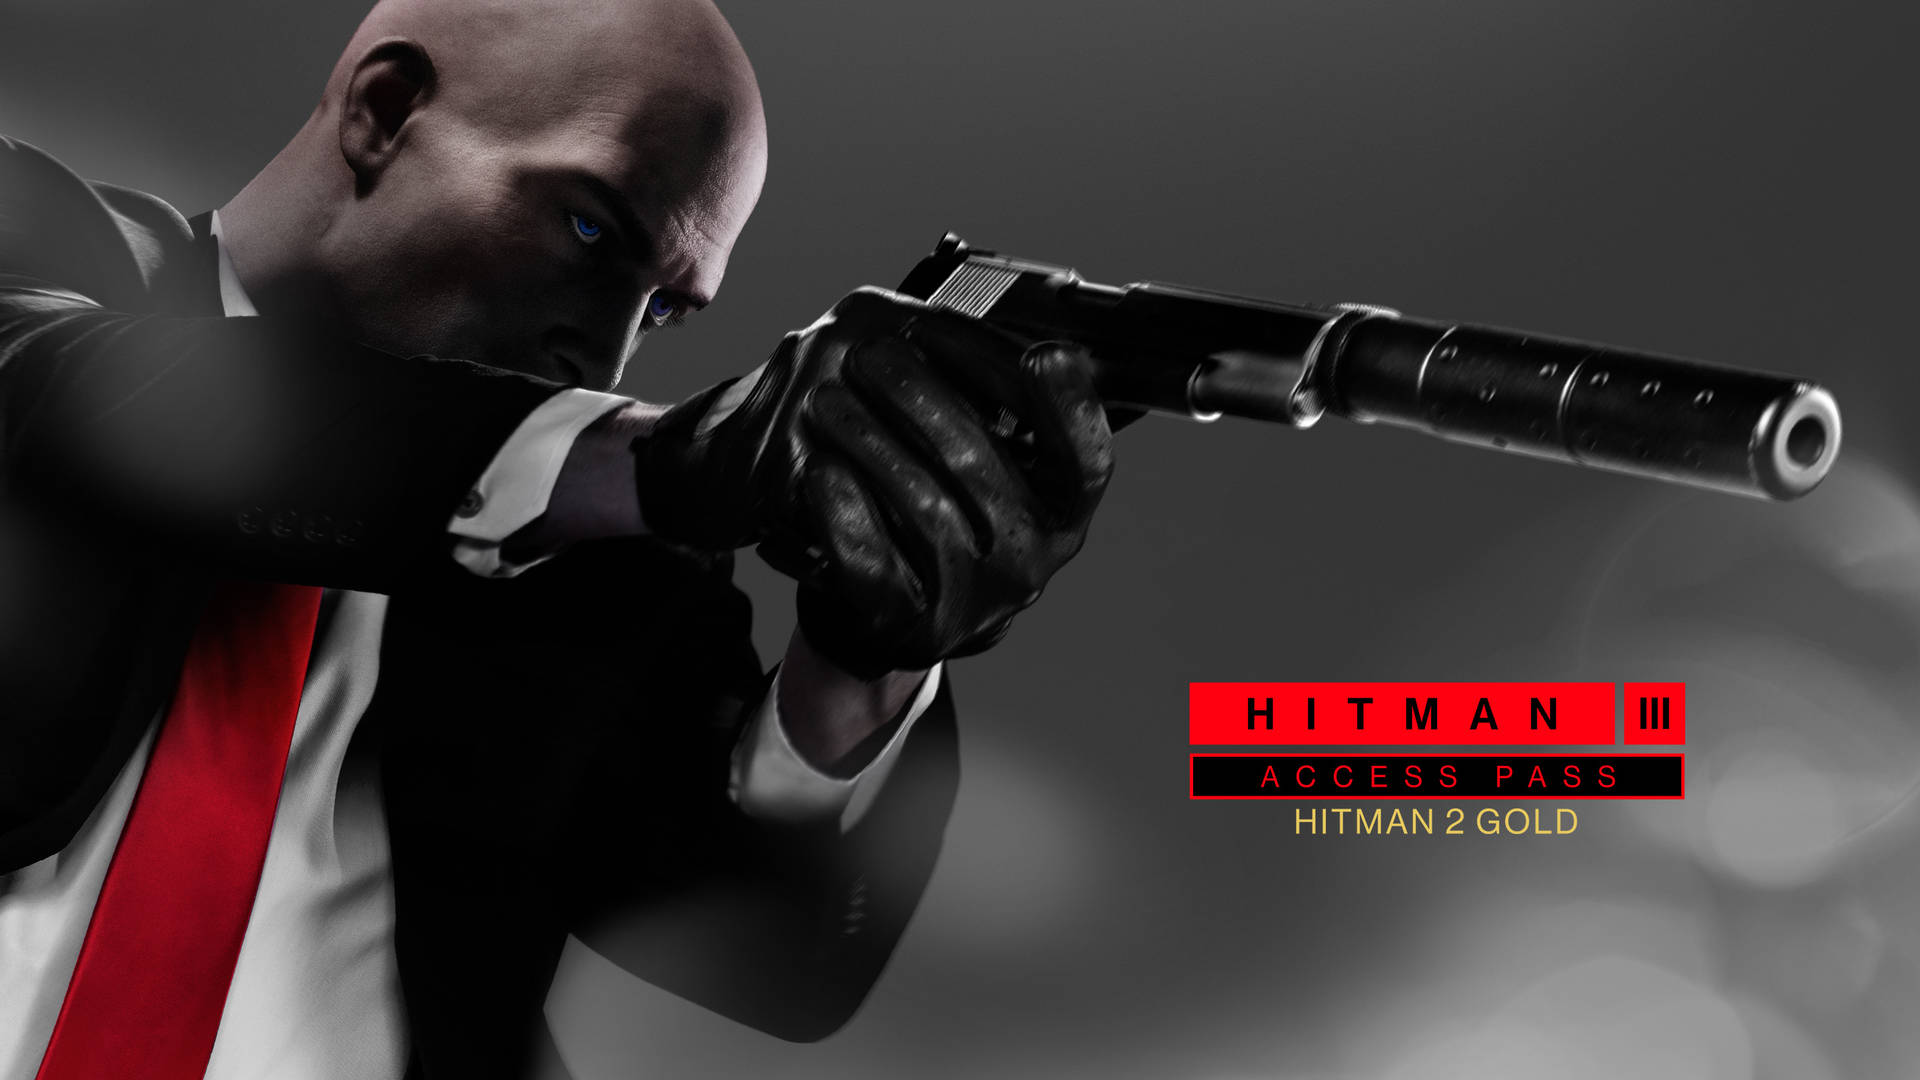 Stealth Gaming Action With Hitman 2 Red Access Pass. Background